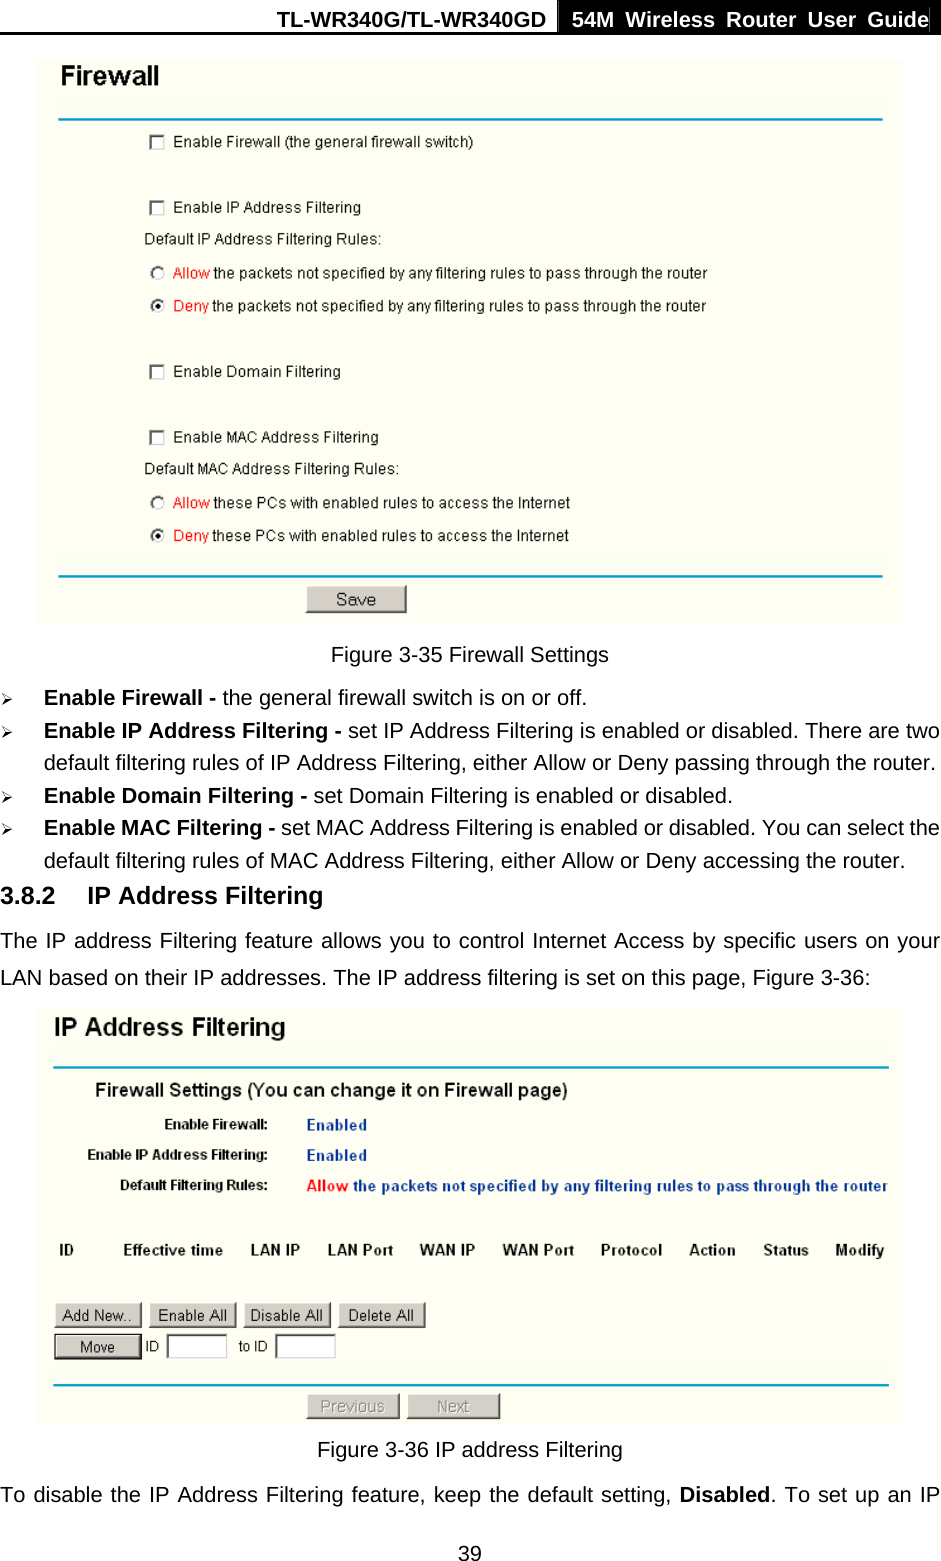 TL-WR340G/TL-WR340GD 54M Wireless Router User Guide  39 Figure 3-35 Firewall Settings ¾ Enable Firewall - the general firewall switch is on or off. ¾ Enable IP Address Filtering - set IP Address Filtering is enabled or disabled. There are two default filtering rules of IP Address Filtering, either Allow or Deny passing through the router. ¾ Enable Domain Filtering - set Domain Filtering is enabled or disabled. ¾ Enable MAC Filtering - set MAC Address Filtering is enabled or disabled. You can select the default filtering rules of MAC Address Filtering, either Allow or Deny accessing the router. 3.8.2  IP Address Filtering The IP address Filtering feature allows you to control Internet Access by specific users on your LAN based on their IP addresses. The IP address filtering is set on this page, Figure 3-36:  Figure 3-36 IP address Filtering To disable the IP Address Filtering feature, keep the default setting, Disabled. To set up an IP 